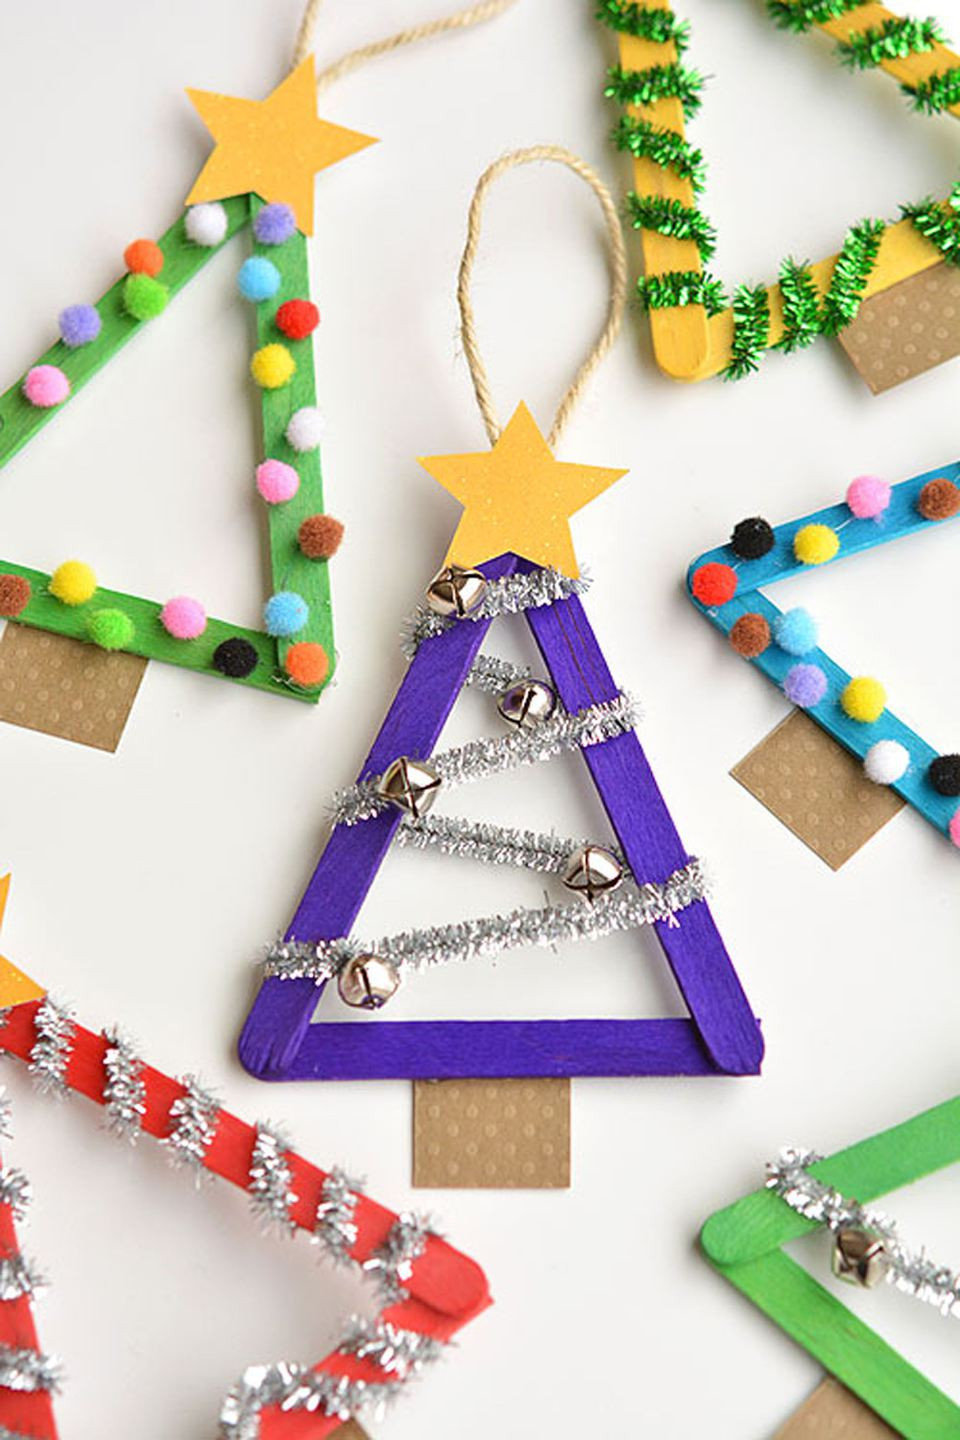 Christmas Projects For Preschoolers
 18 Christmas Crafts for Toddlers and Preschoolers